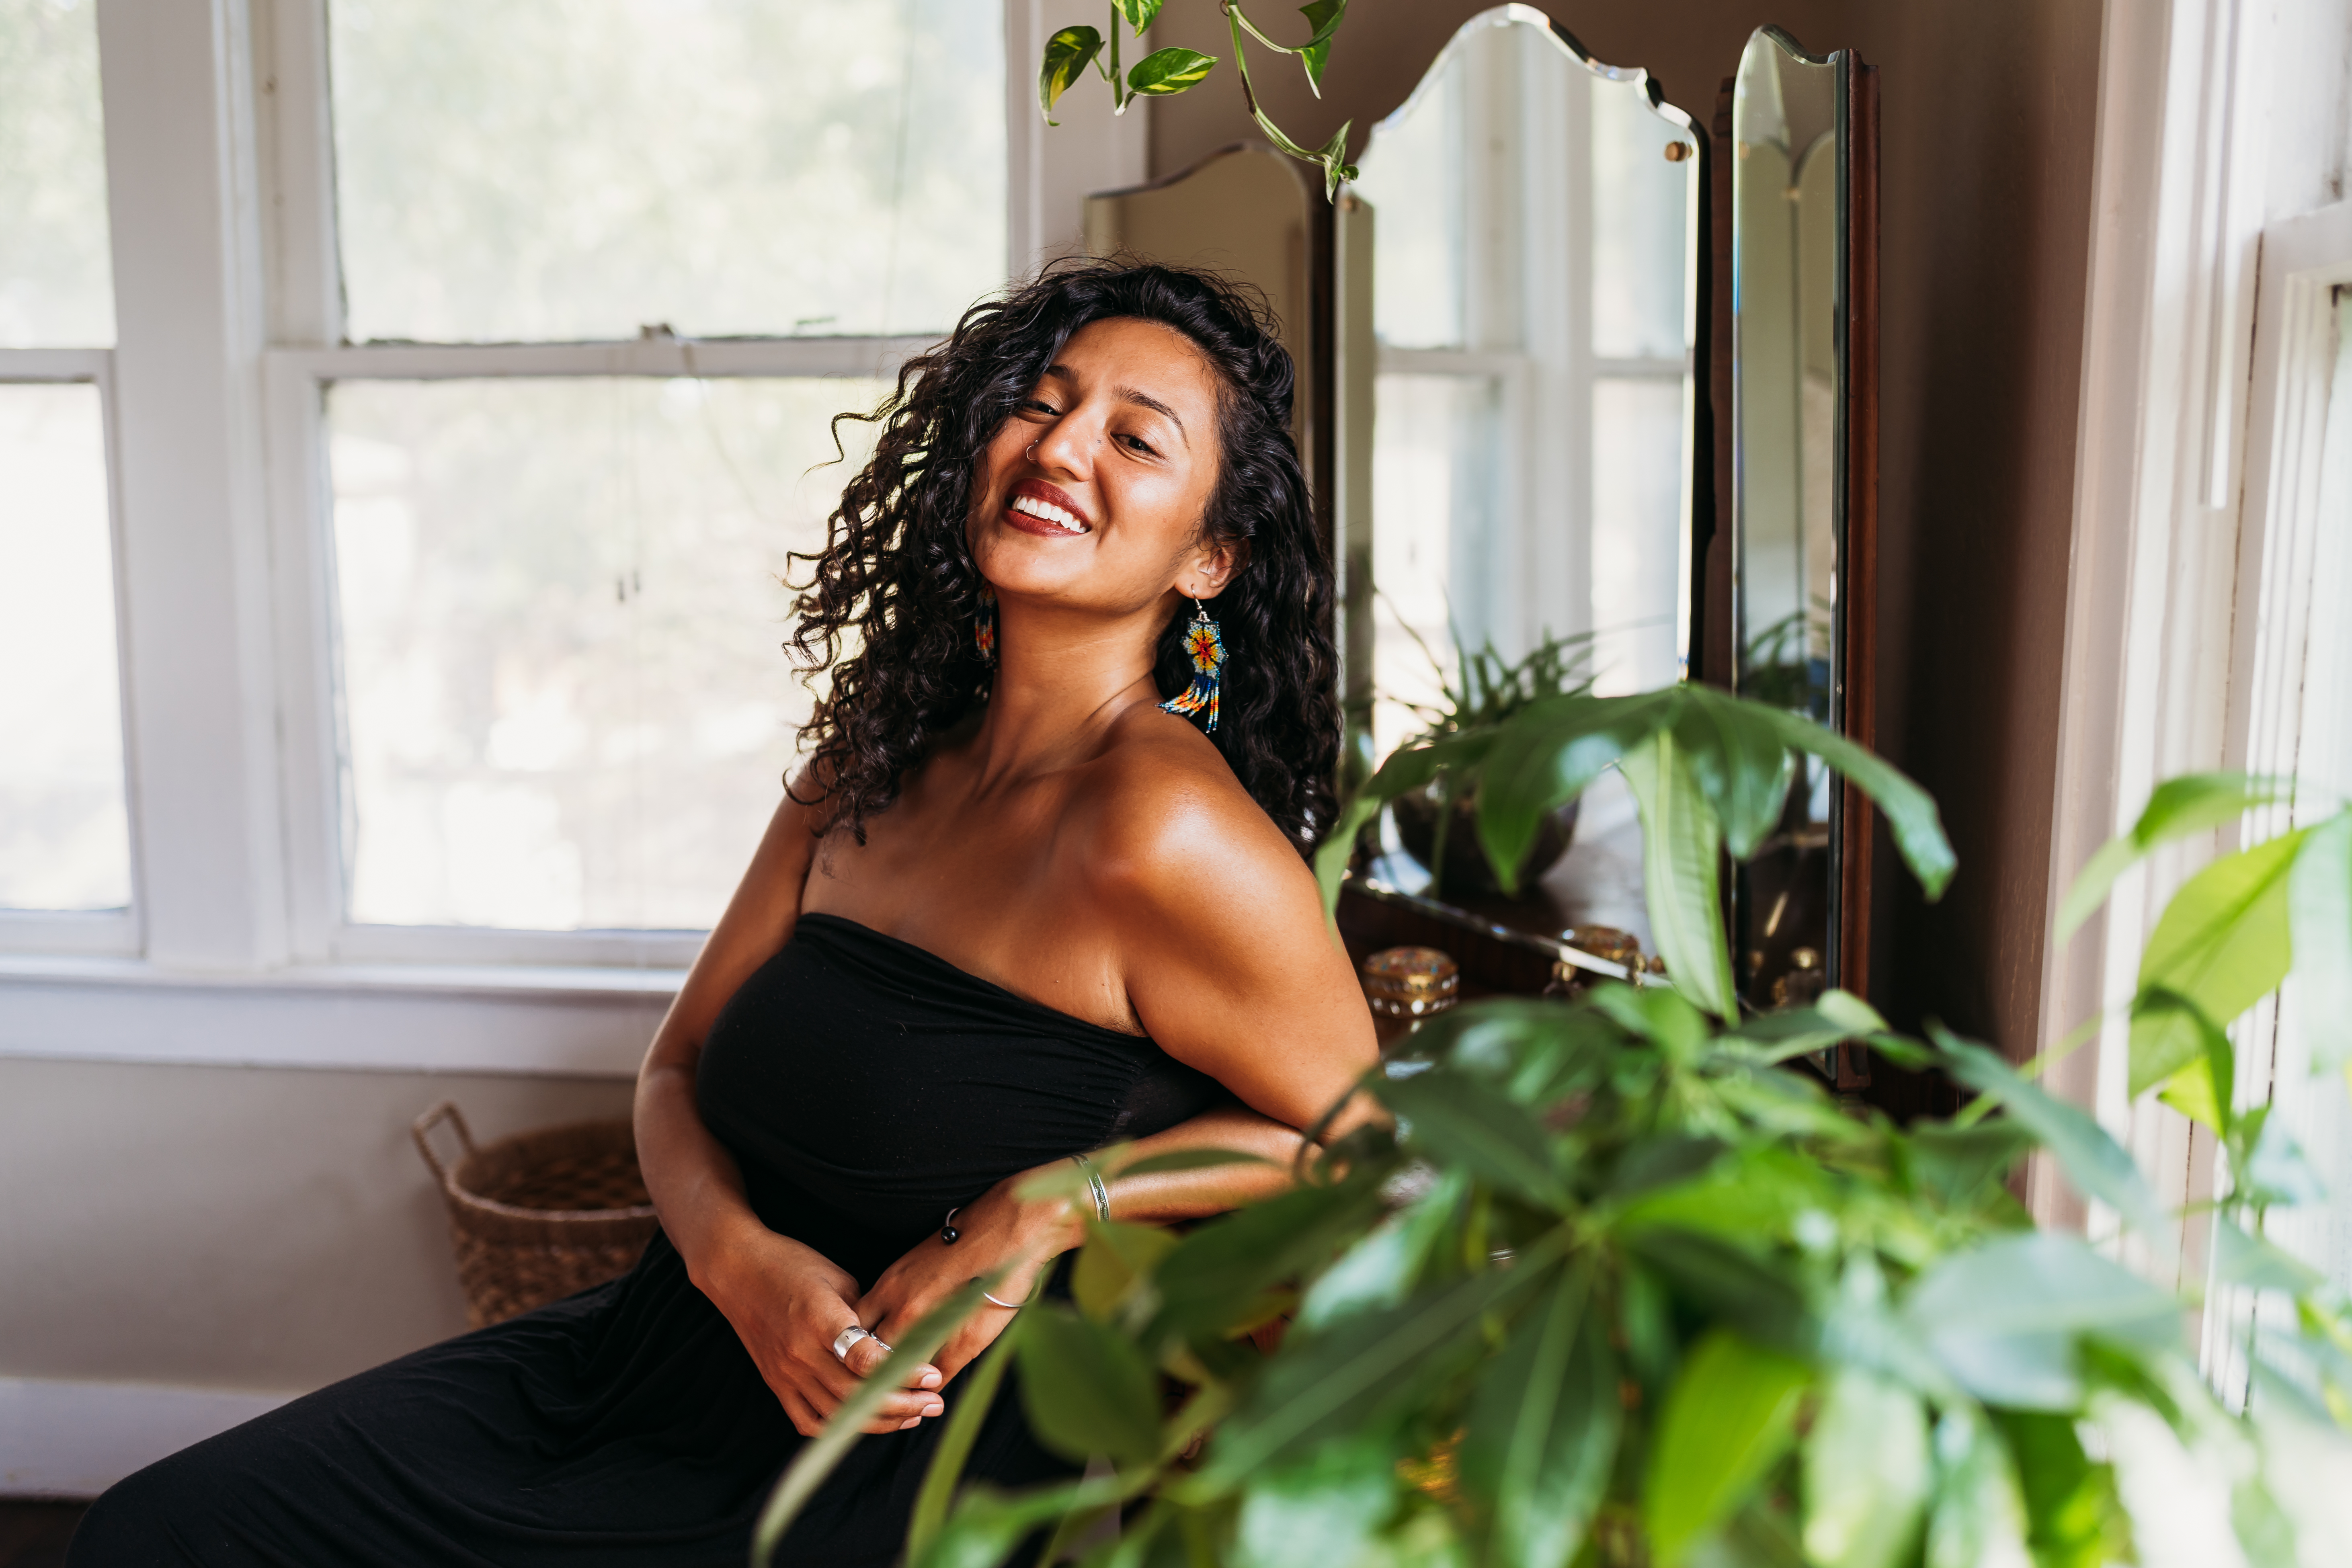 A woman with curly hair in a black strapless dress sits in a chair next to a green plant and smiles at the camera.